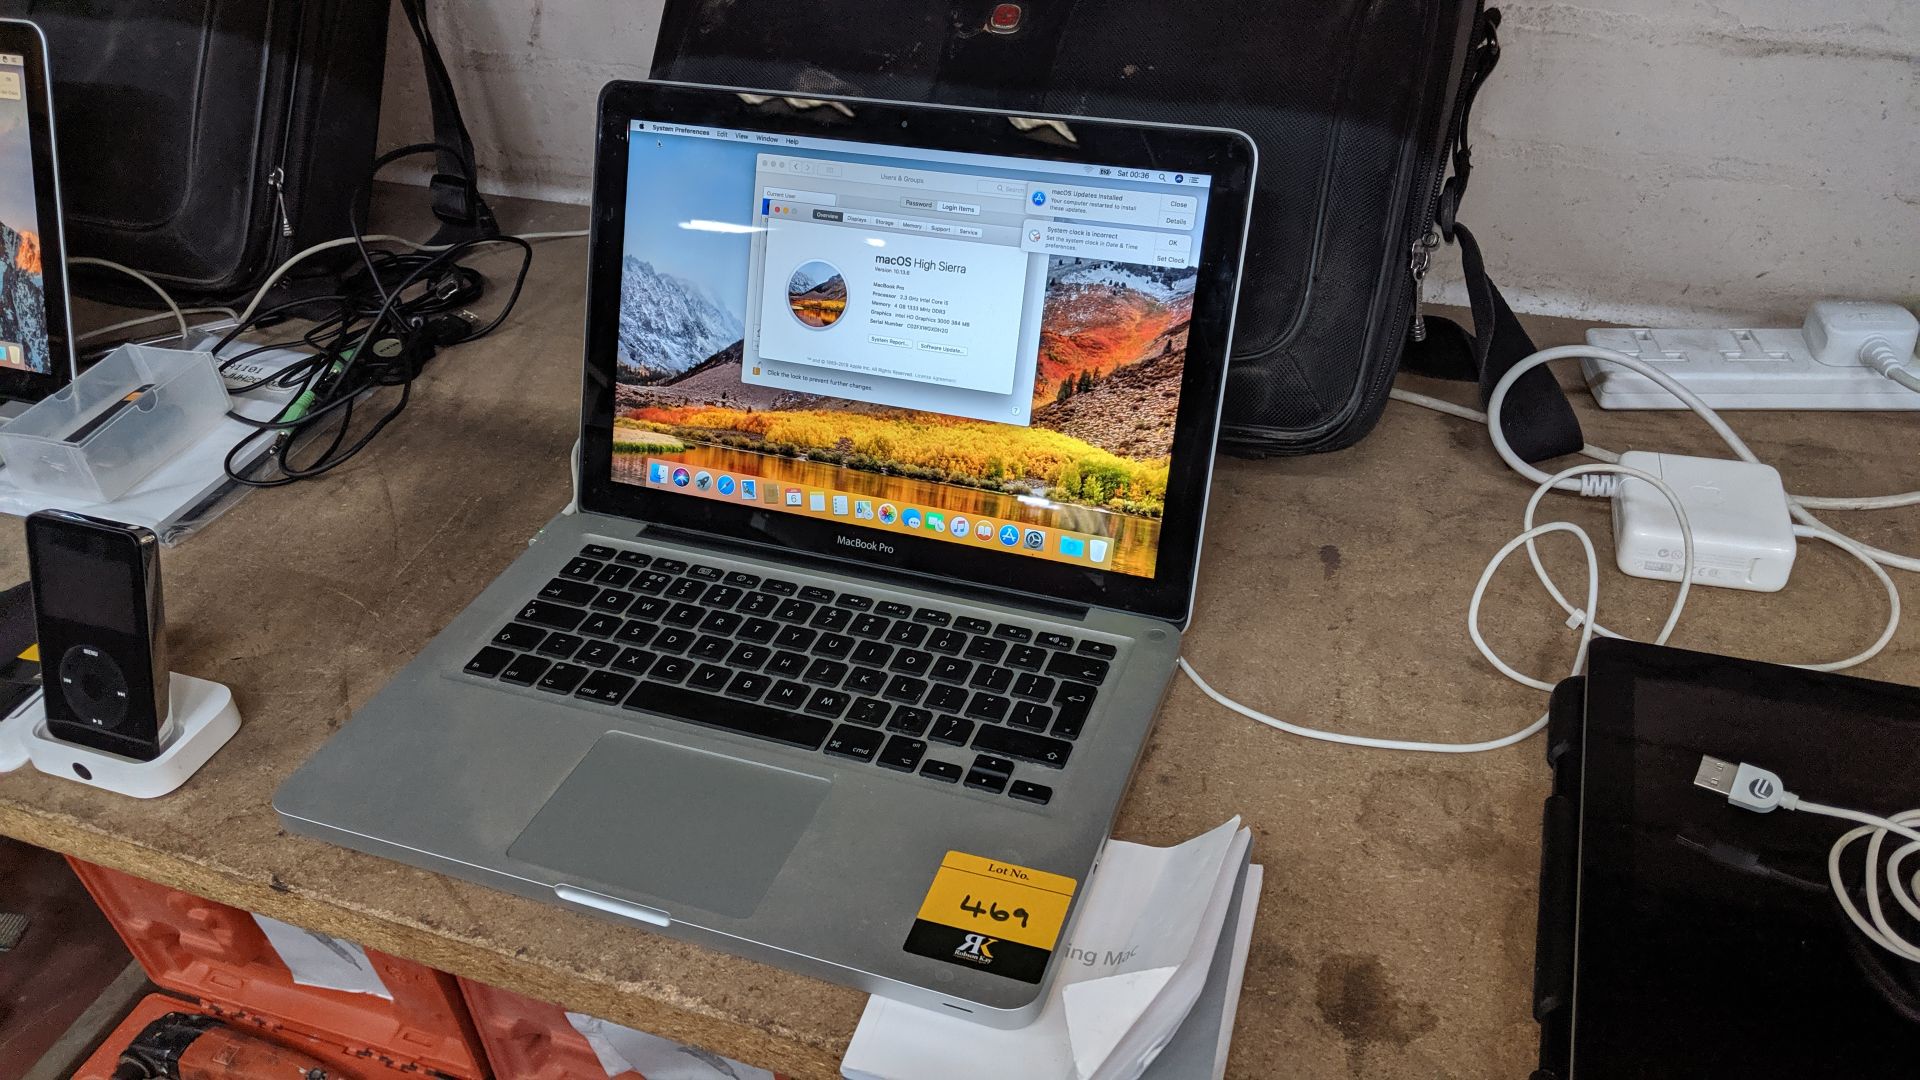 Apple MacBook Pro notebook computer with 2.3GHzIntel Core i5, 4 GB Ram, 320GB HDD - Image 3 of 6